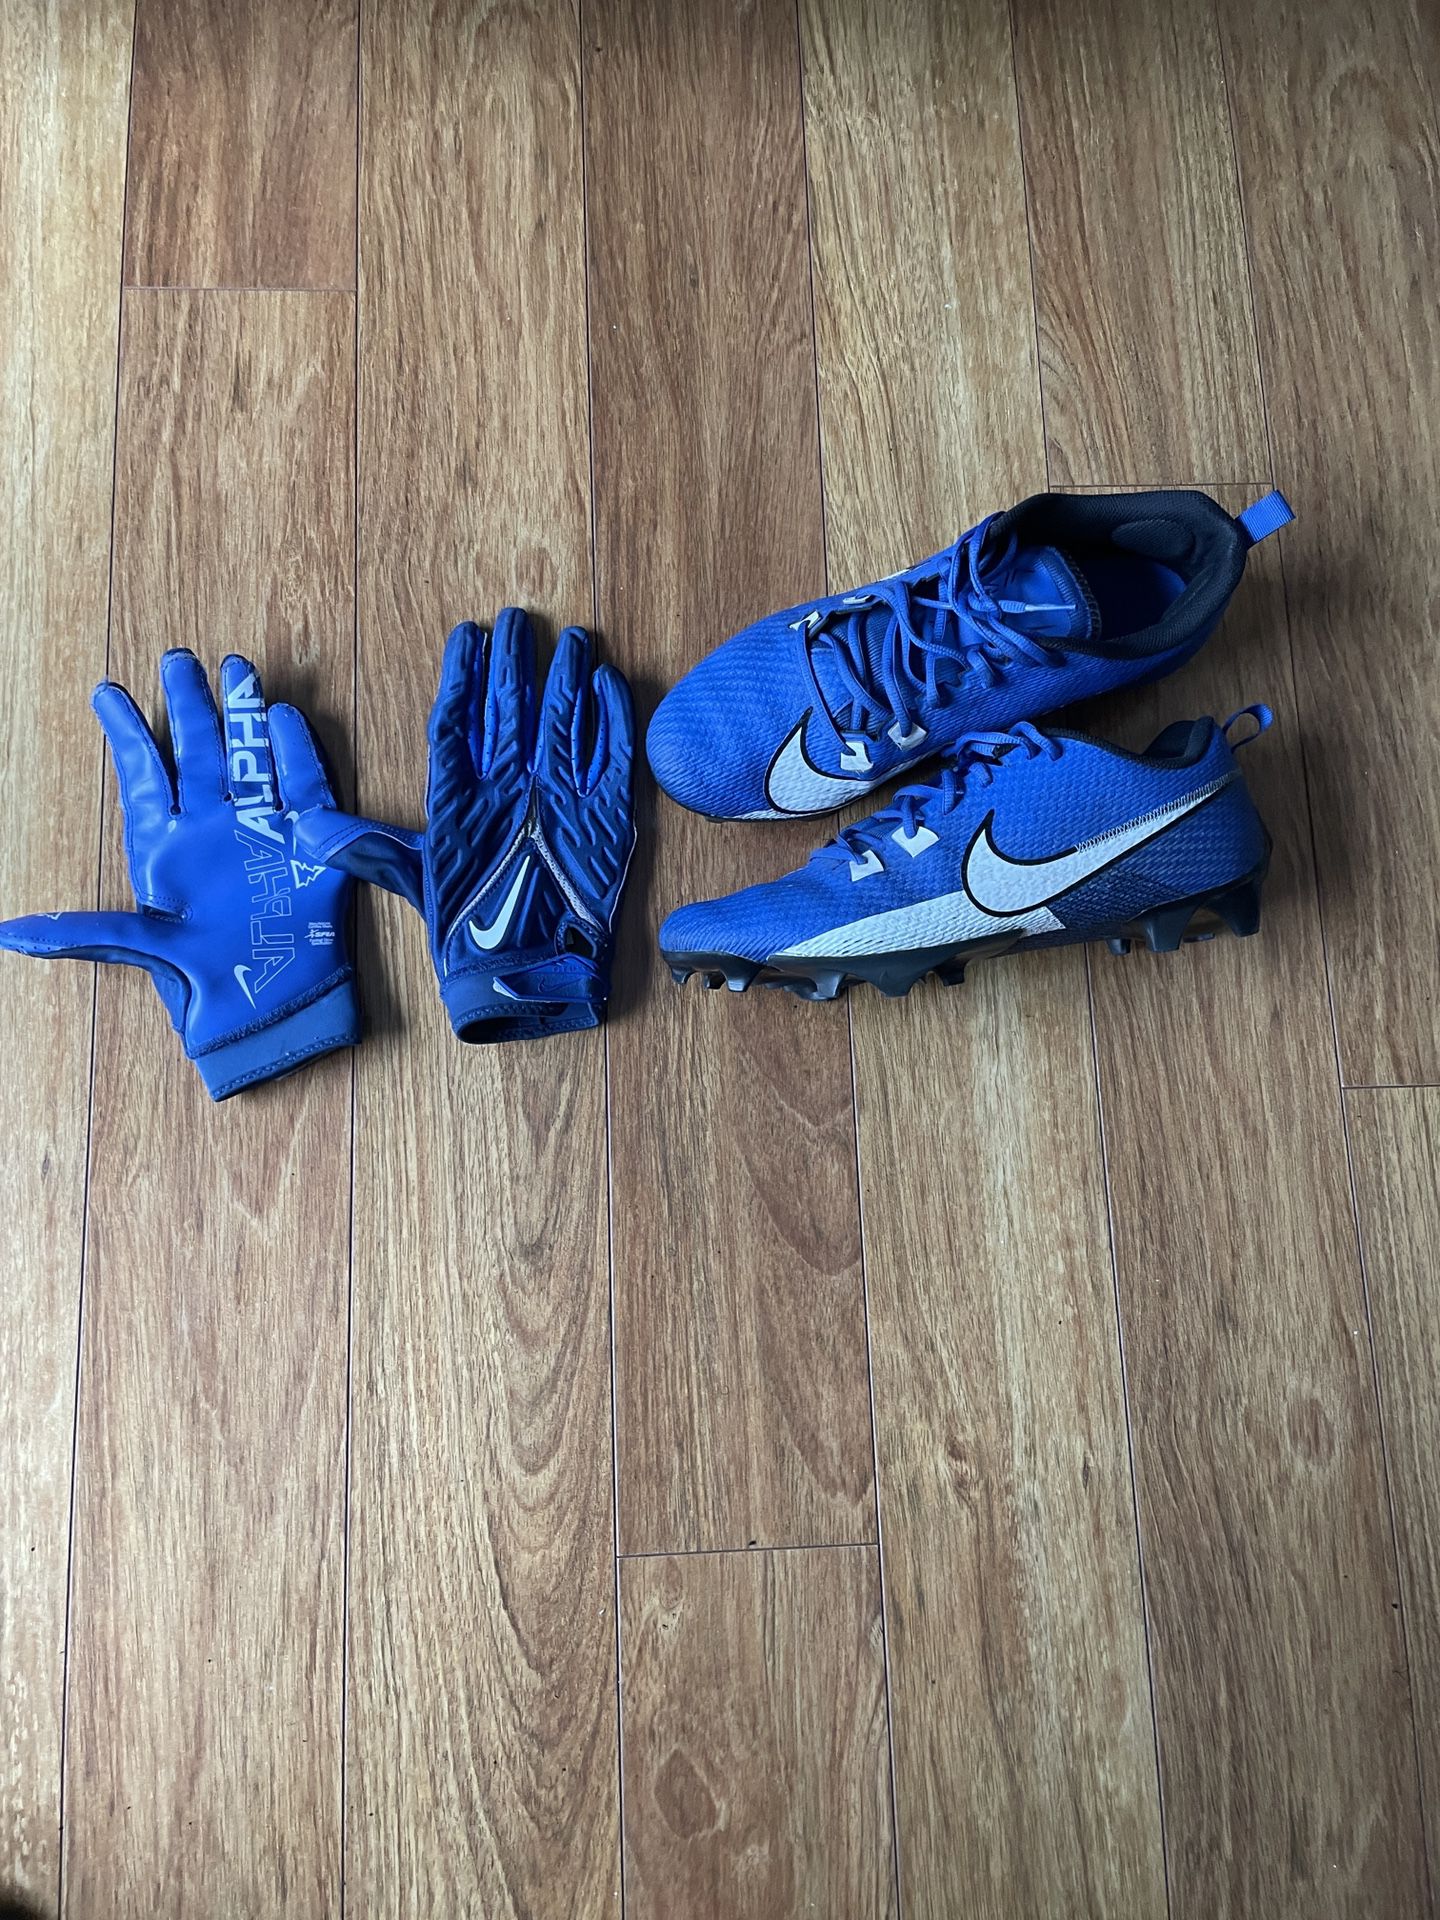 Blue football cleats with blue football gloves